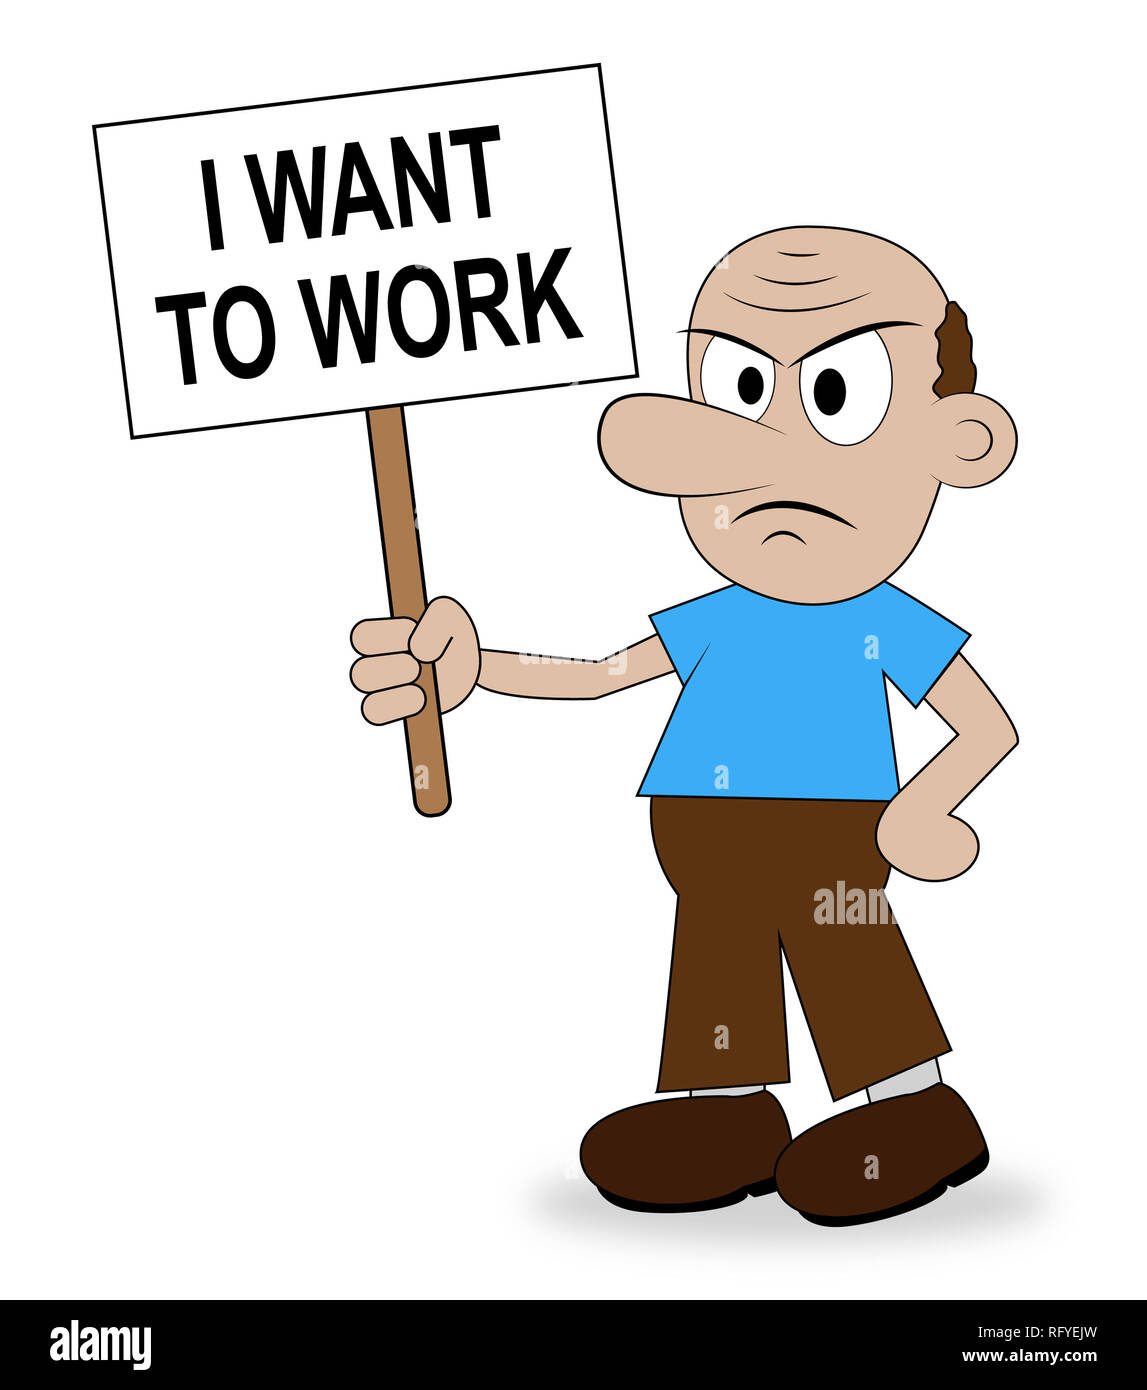 Government Furlough Want To Work Sign Means Layoff. National Shutdown From Washington - 3d Illustration Stock Photo